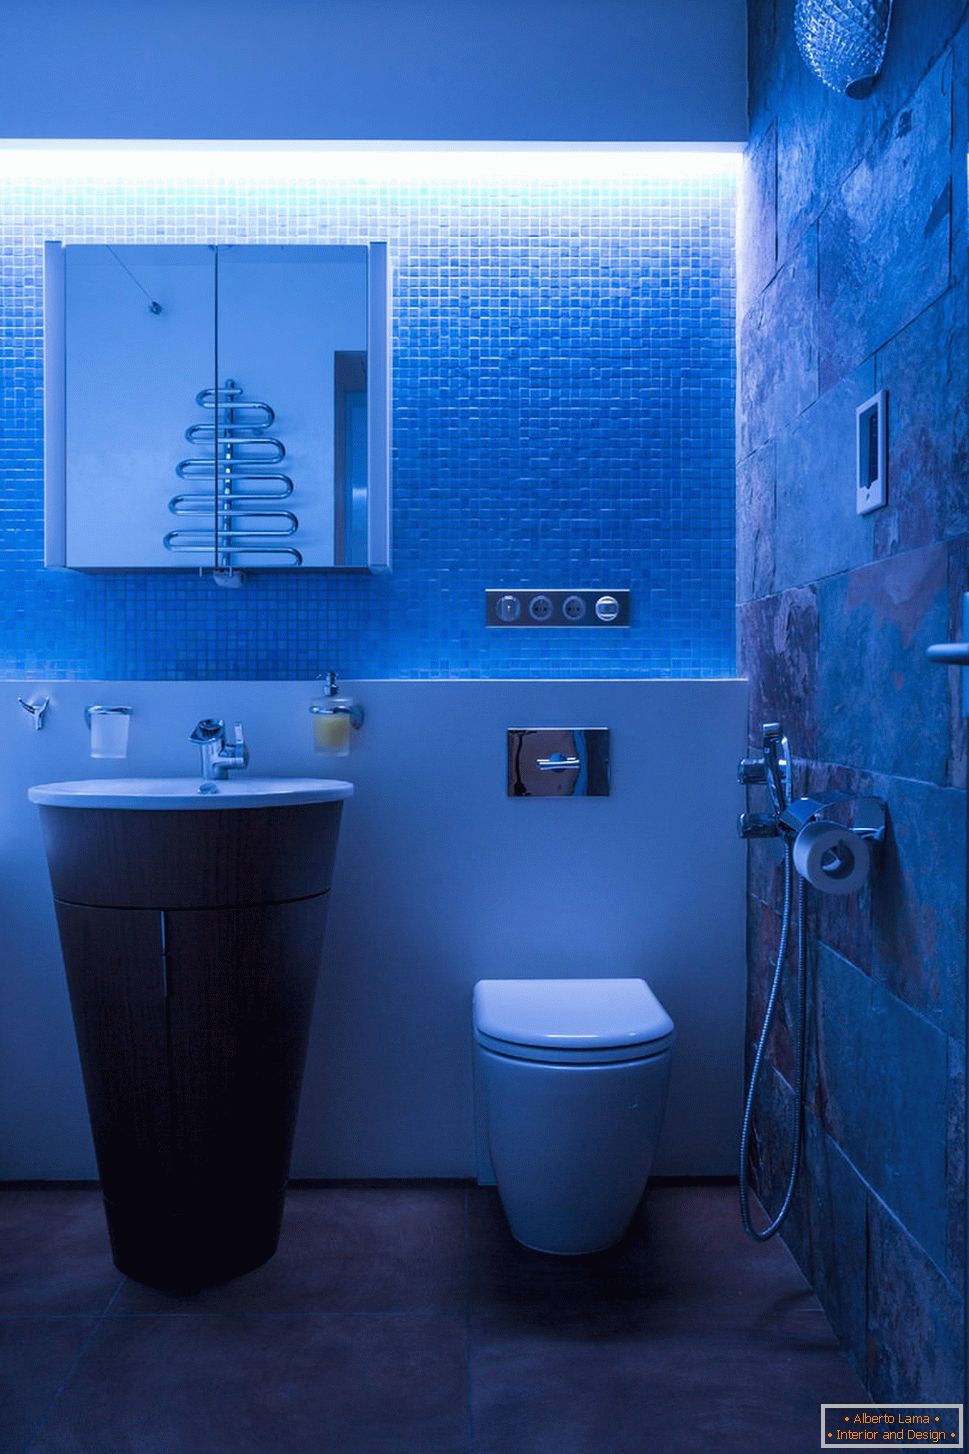 Bathroom in the apartment with controlled lighting